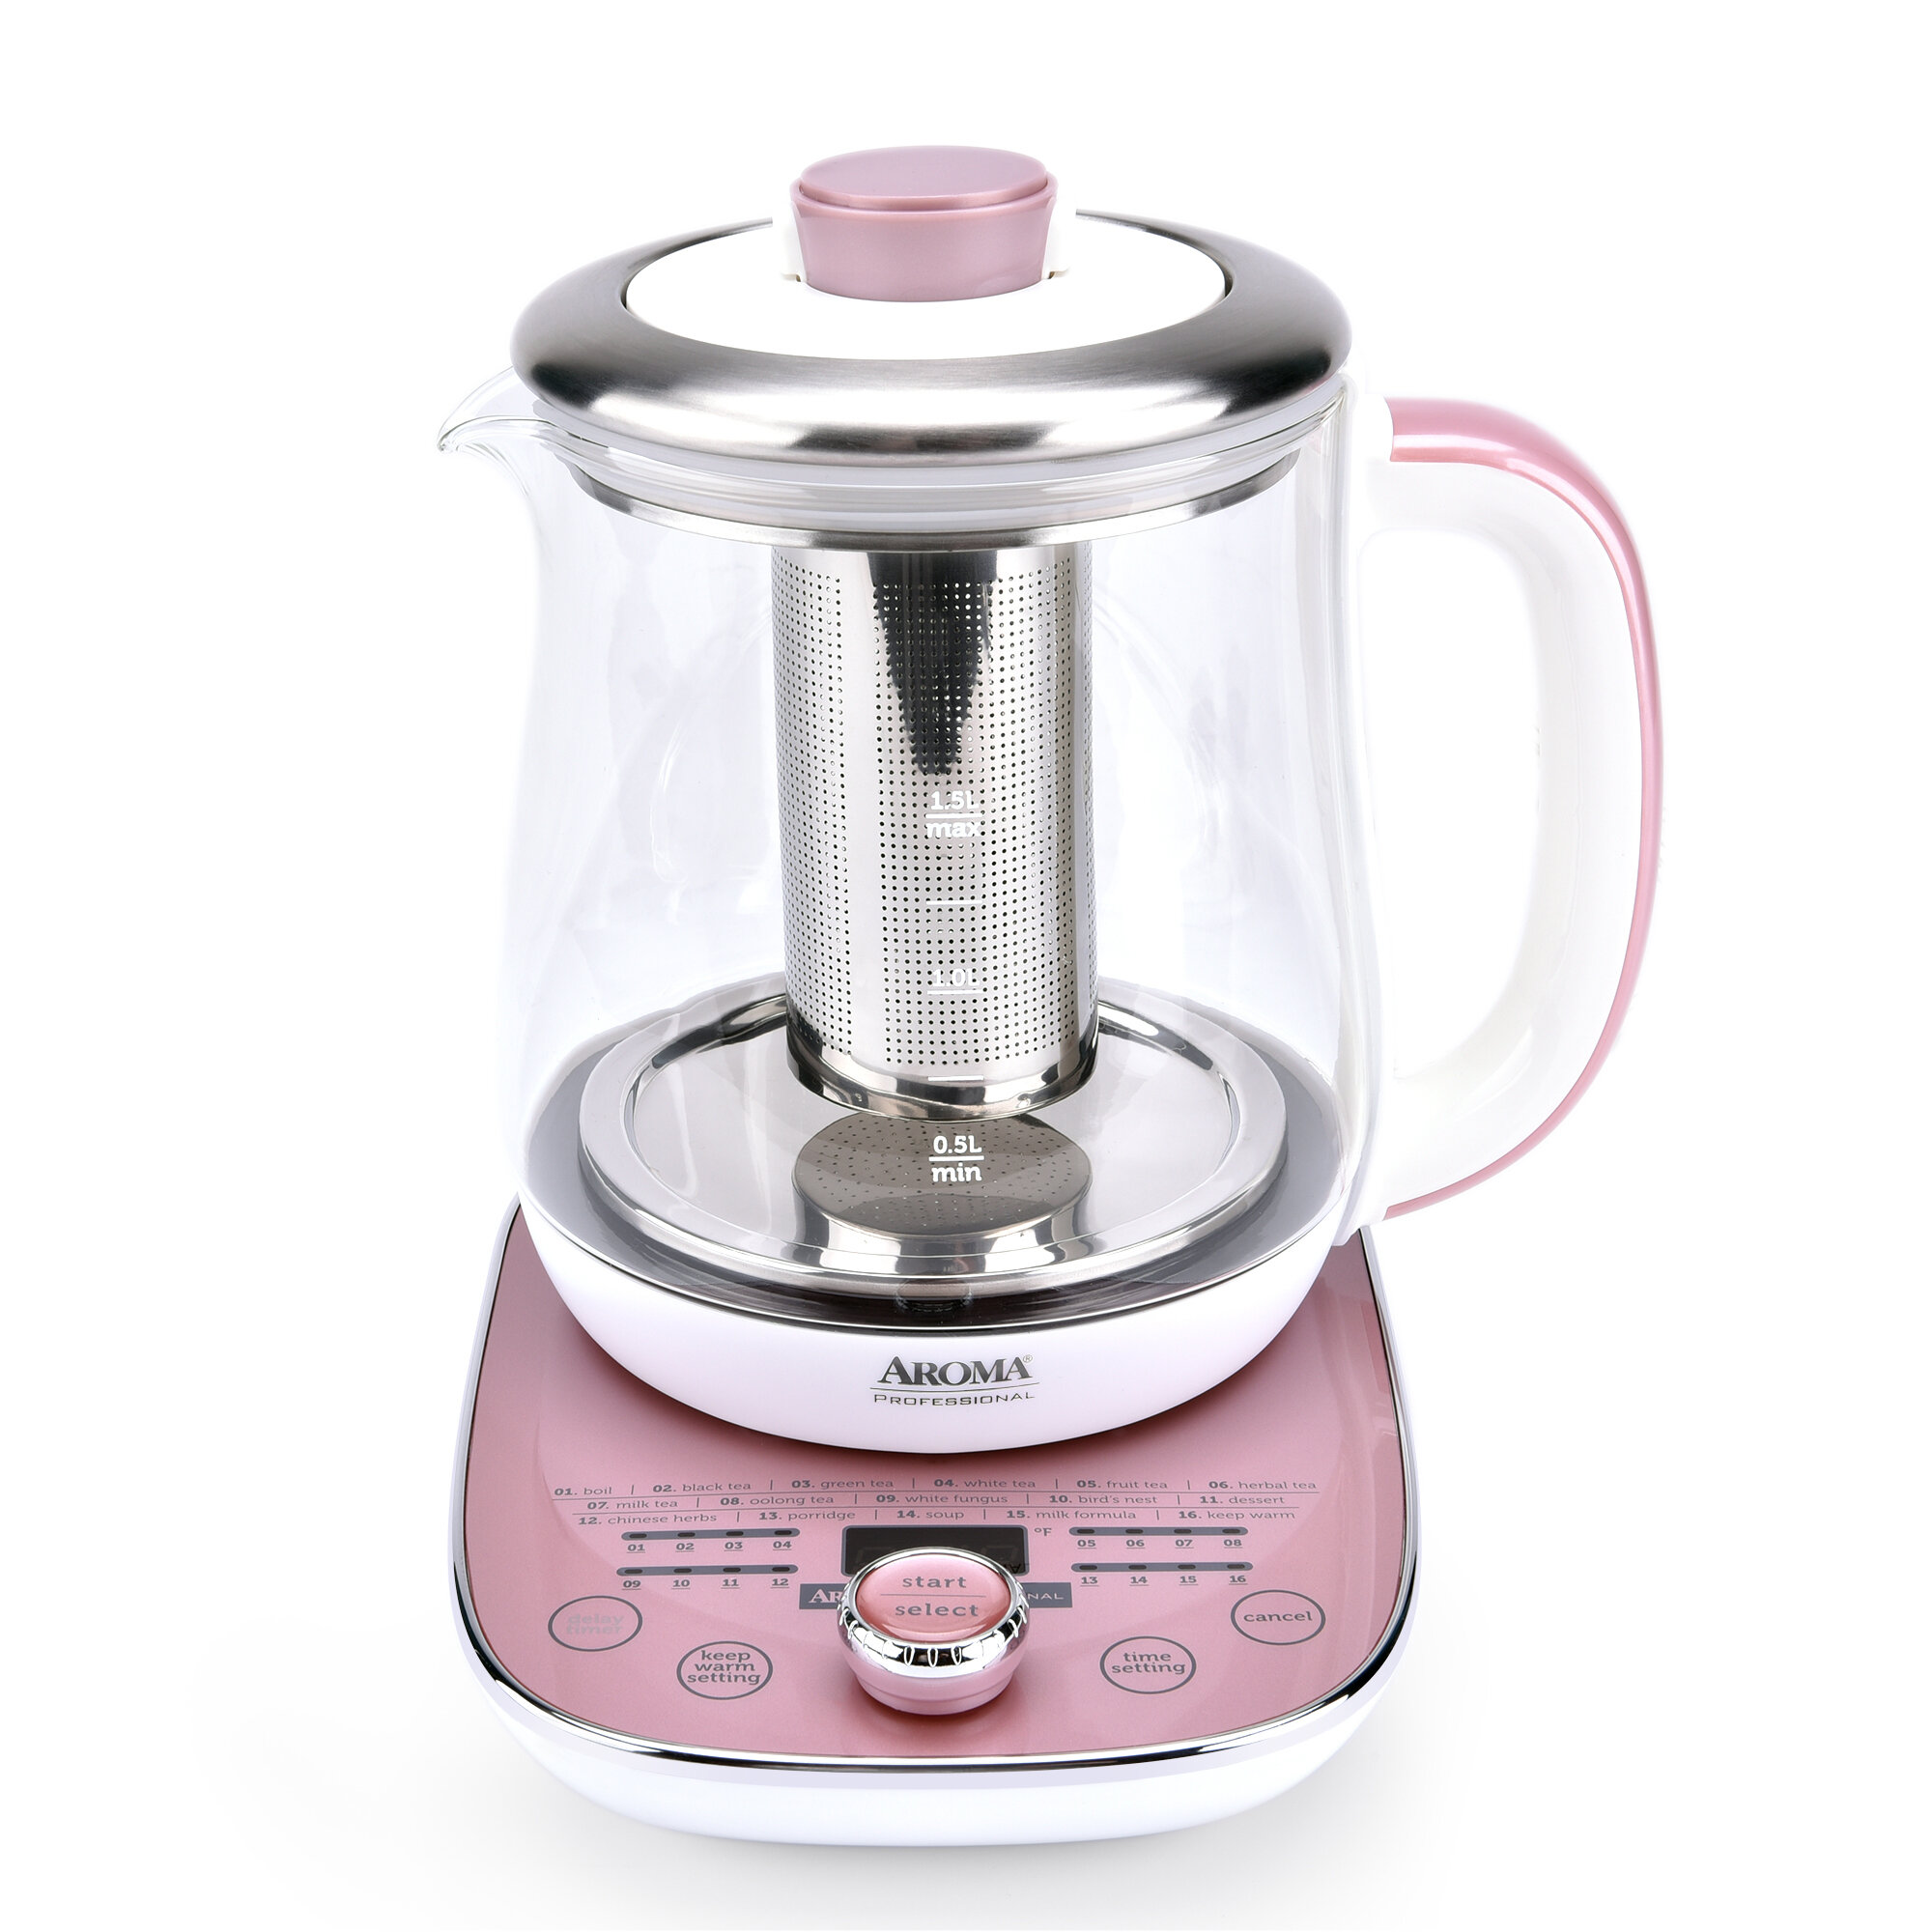 AROMAÂ® Professional 1.5L / 6-Cup Glass Digital Electric Tea Maker,  Automatic Keep Warm Mode, 16 Different Heat Setting Options, Spill-Free  Pouring